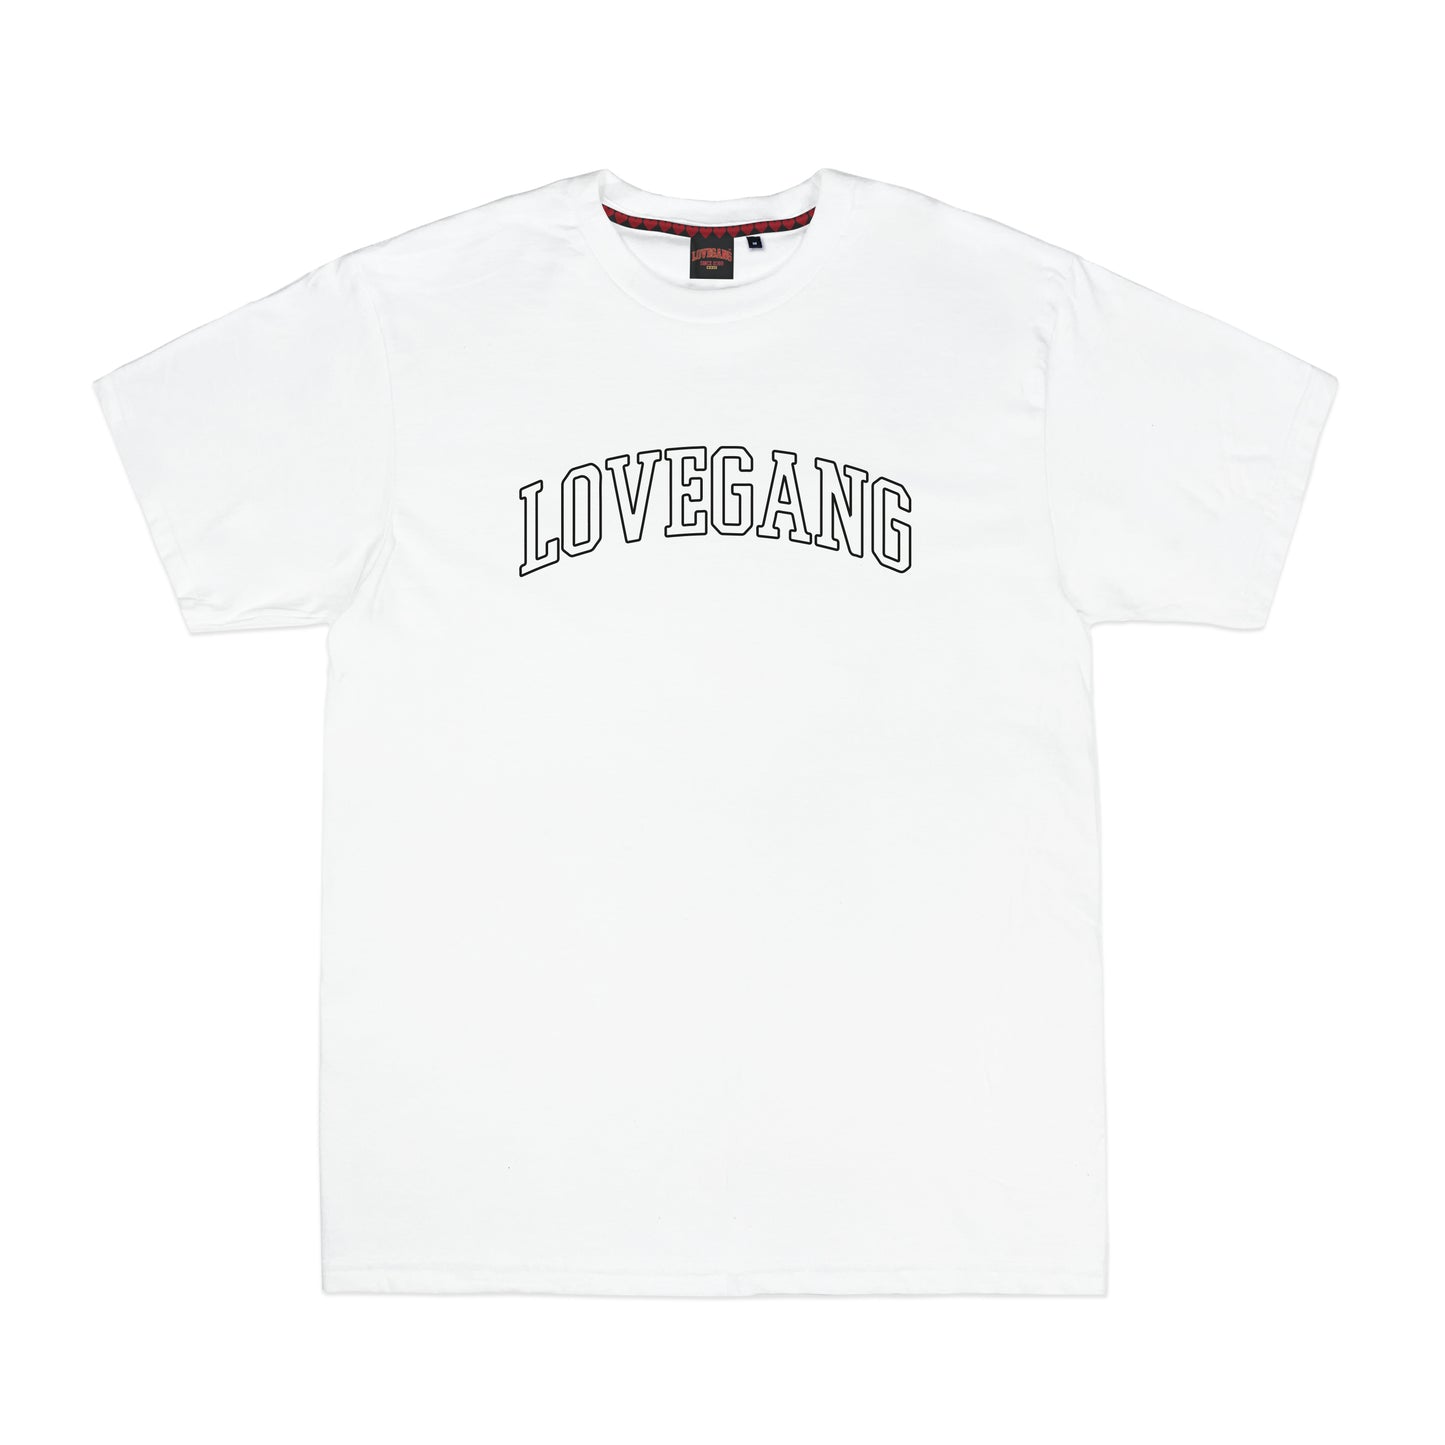 COLLEGE S/S’18 - T-SHIRT (WH)